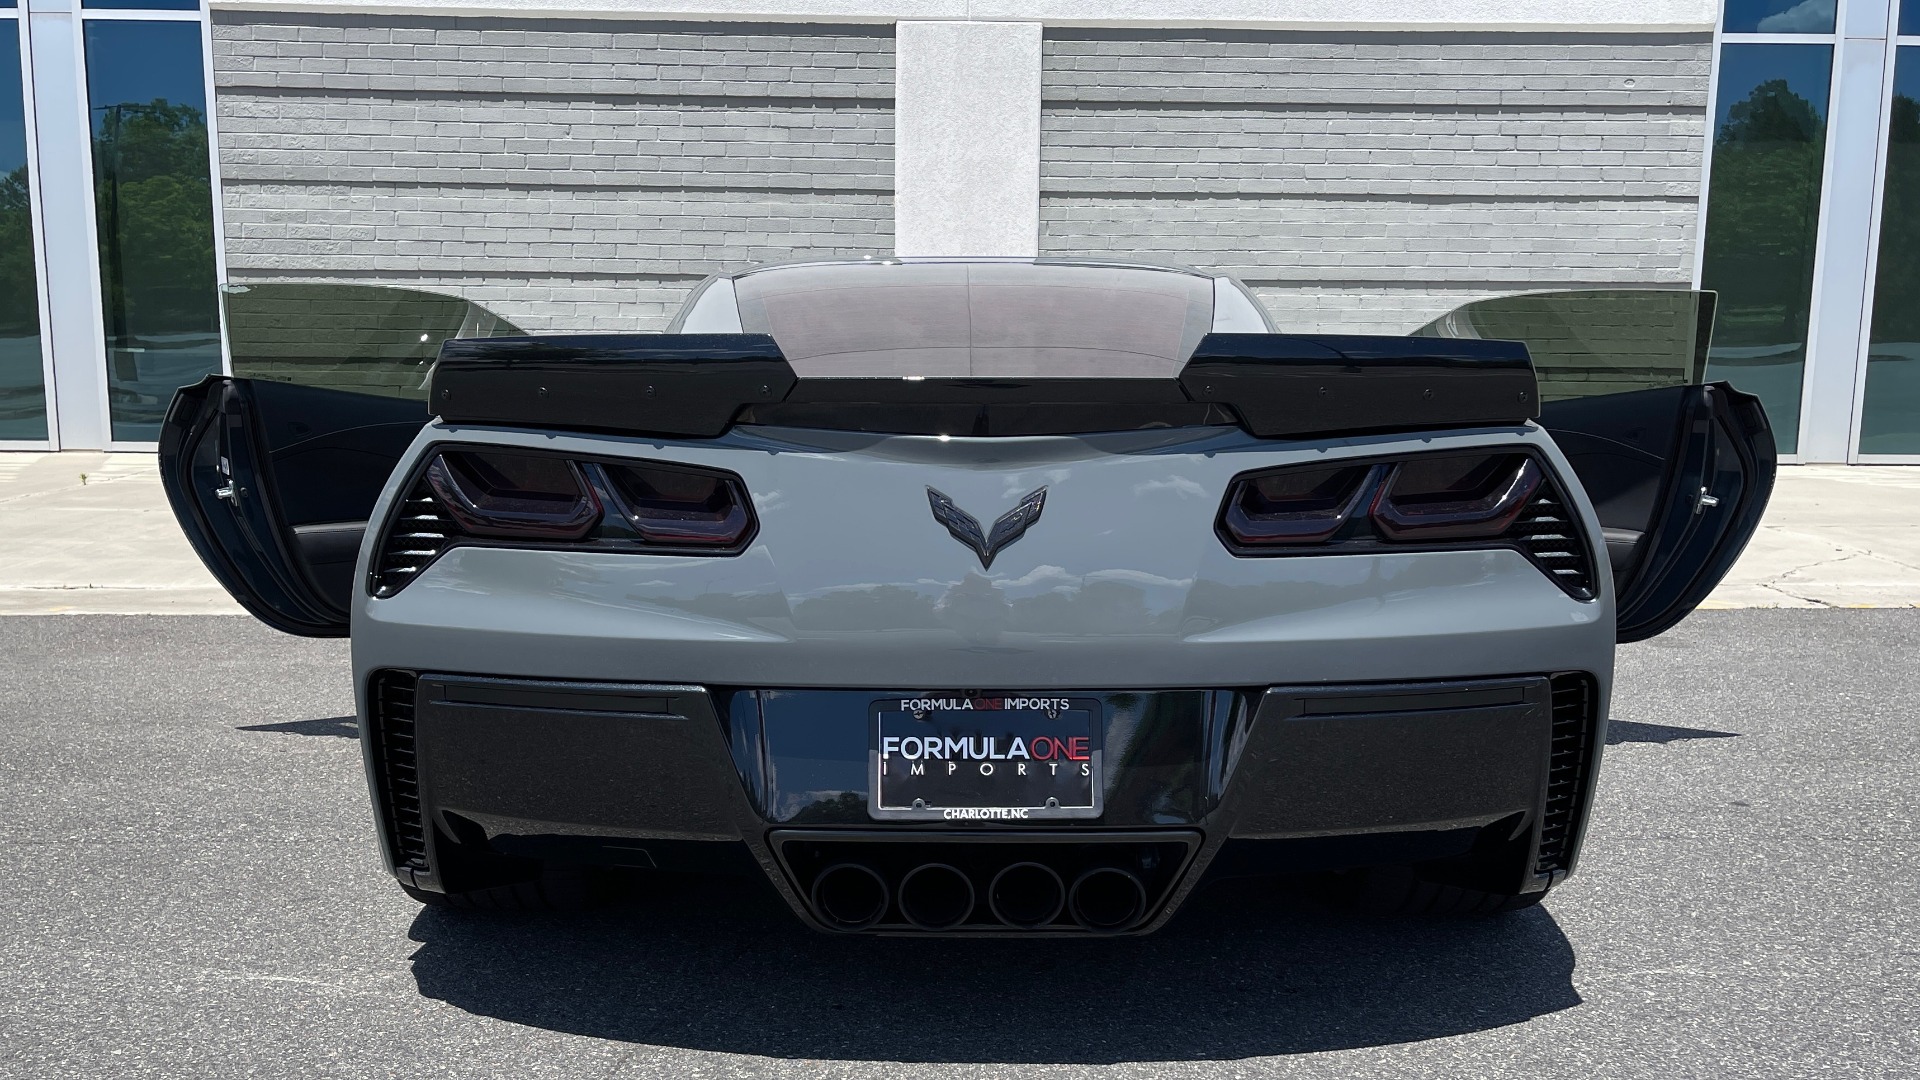 Used 2019 Chevrolet CORVETTE GRAND SPORT 3LT / SUPERCHARGED 6.2L V8 / NAV / REARVIEW for sale Sold at Formula Imports in Charlotte NC 28227 29